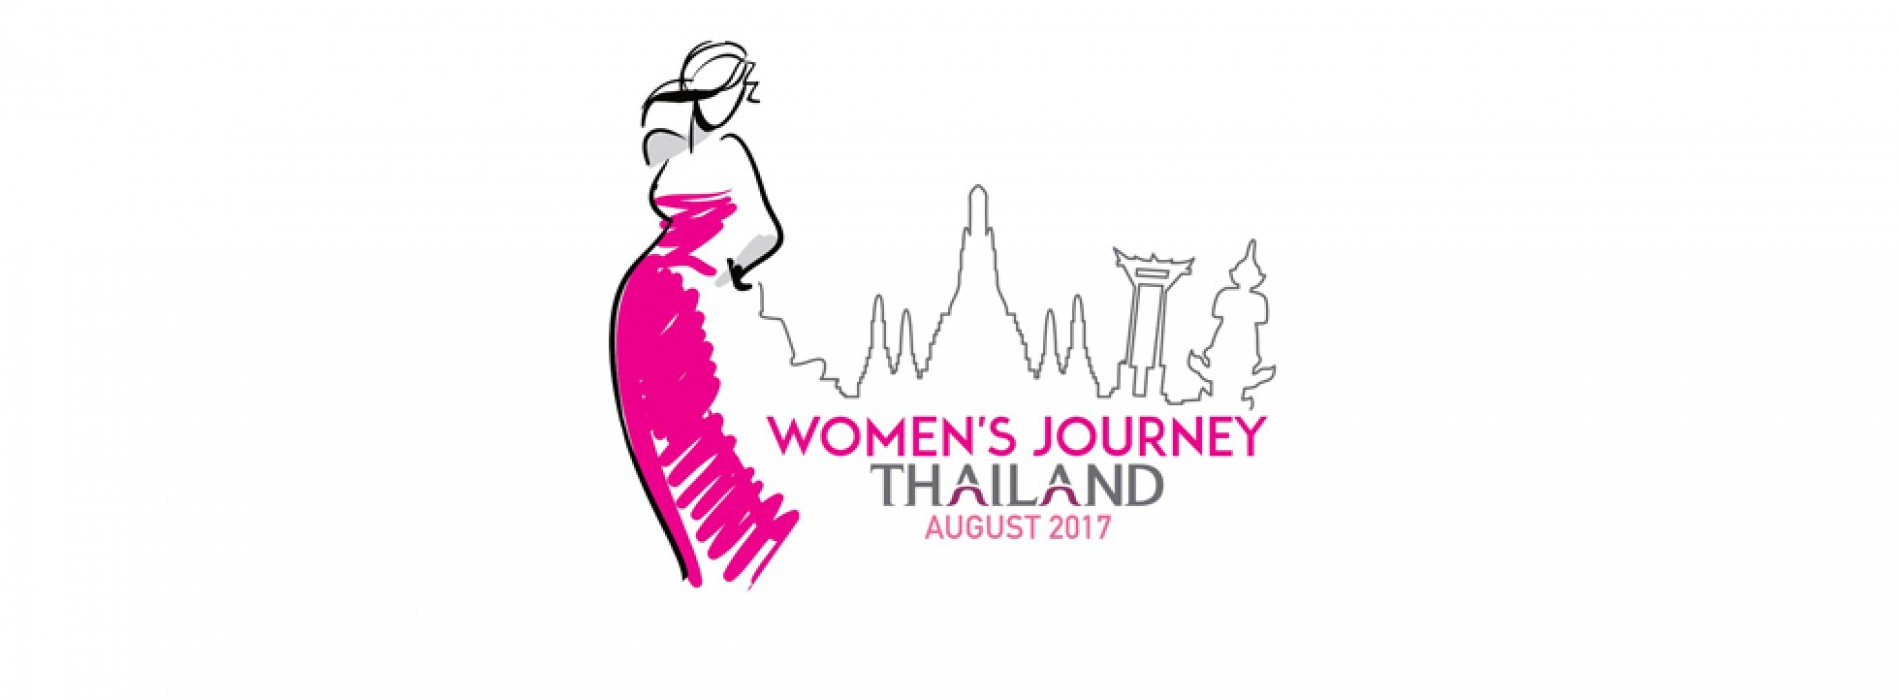 Women’s Journey Thailand campaign to return with great offers throughout August 2017